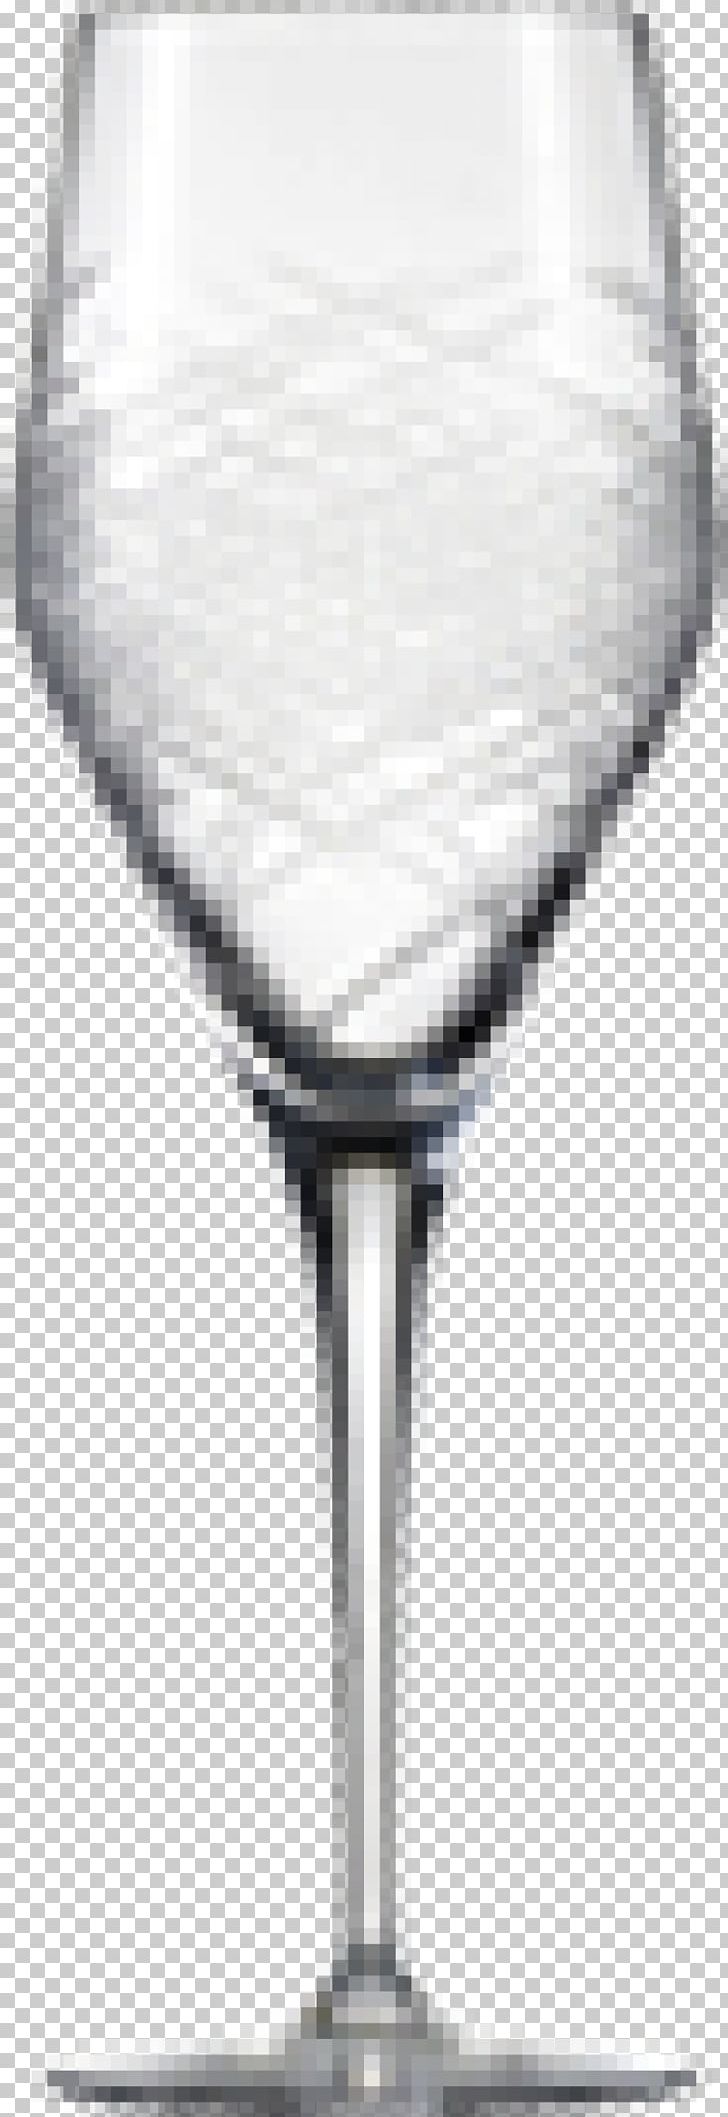 Wine Glass Champagne Glass Table-glass Cocktail Glass PNG, Clipart, Alcoholic Drink, Bar, Champagne Glass, Champagne Stemware, Charles Free PNG Download